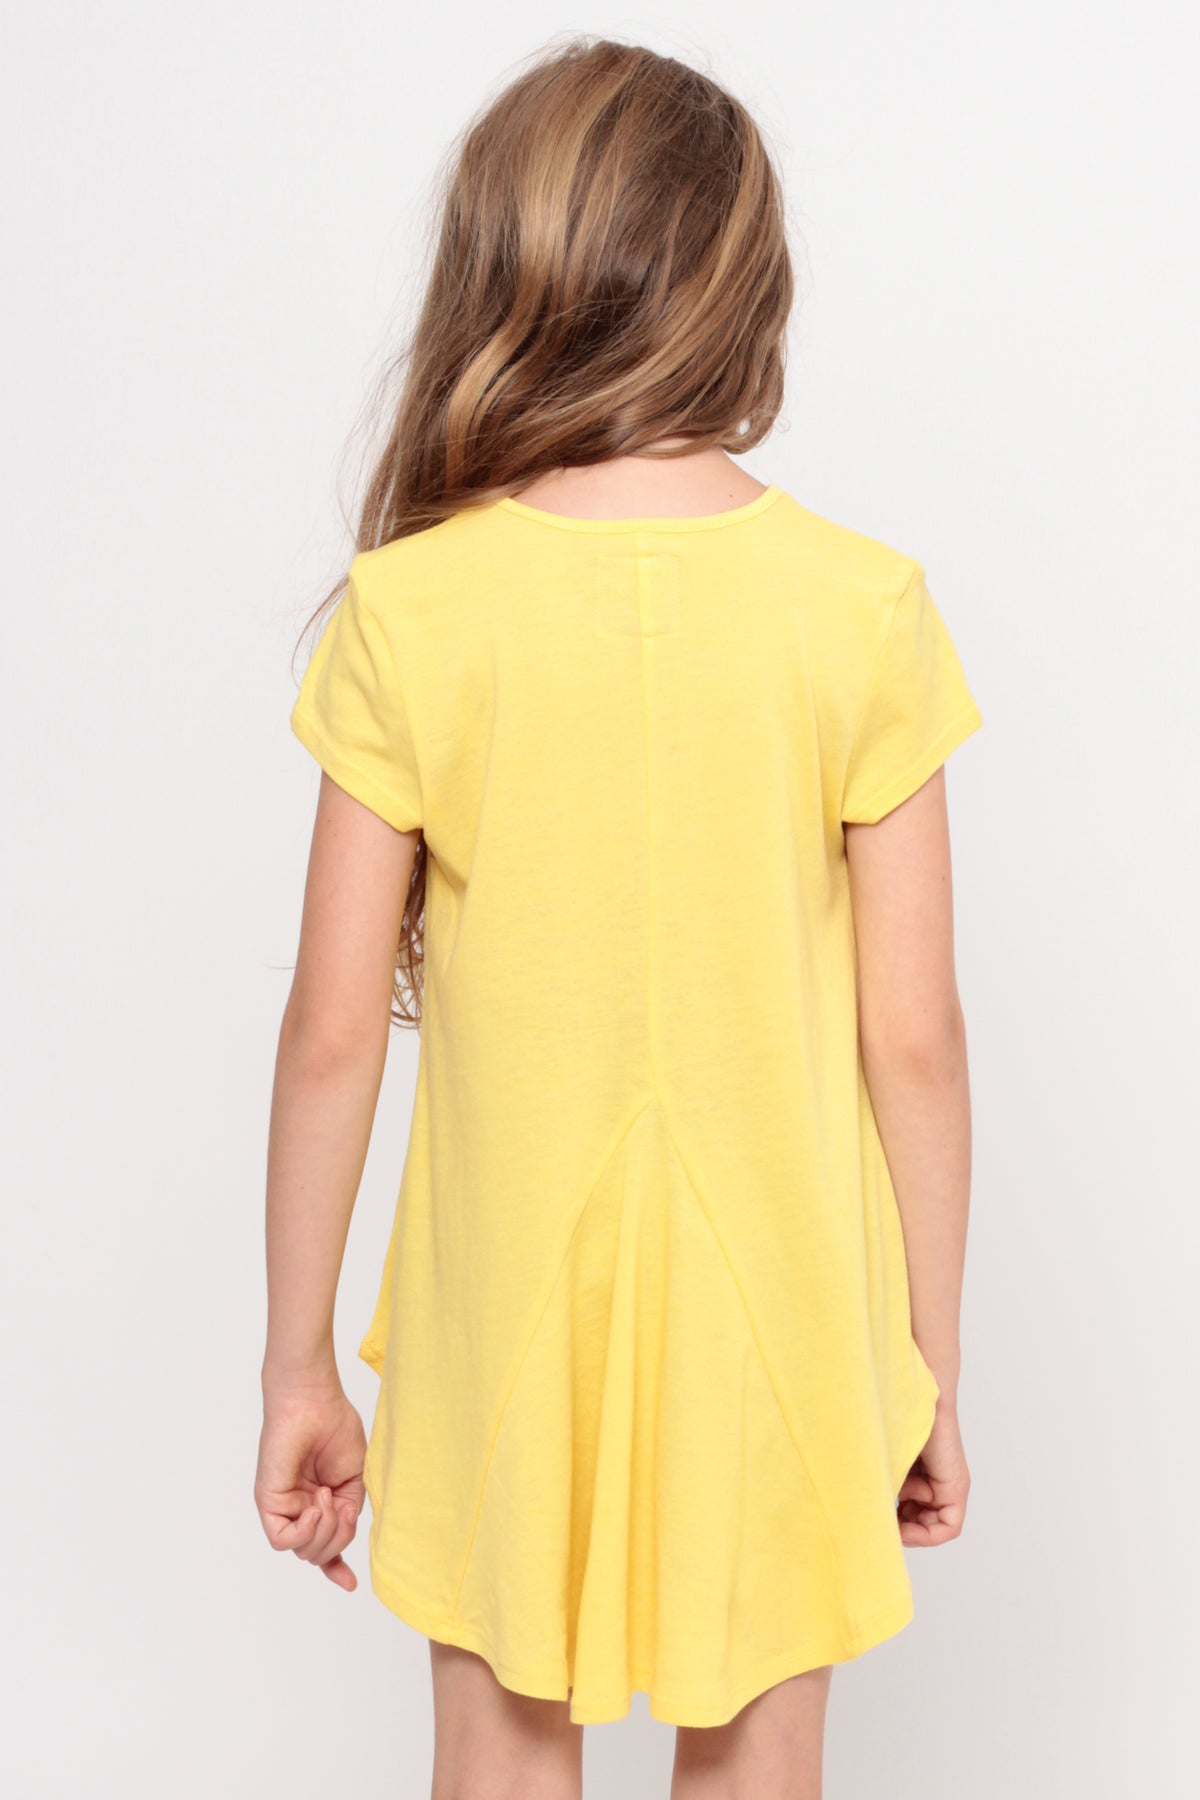 So Over It | Hi-Low Ruffle Back Top - Yellow